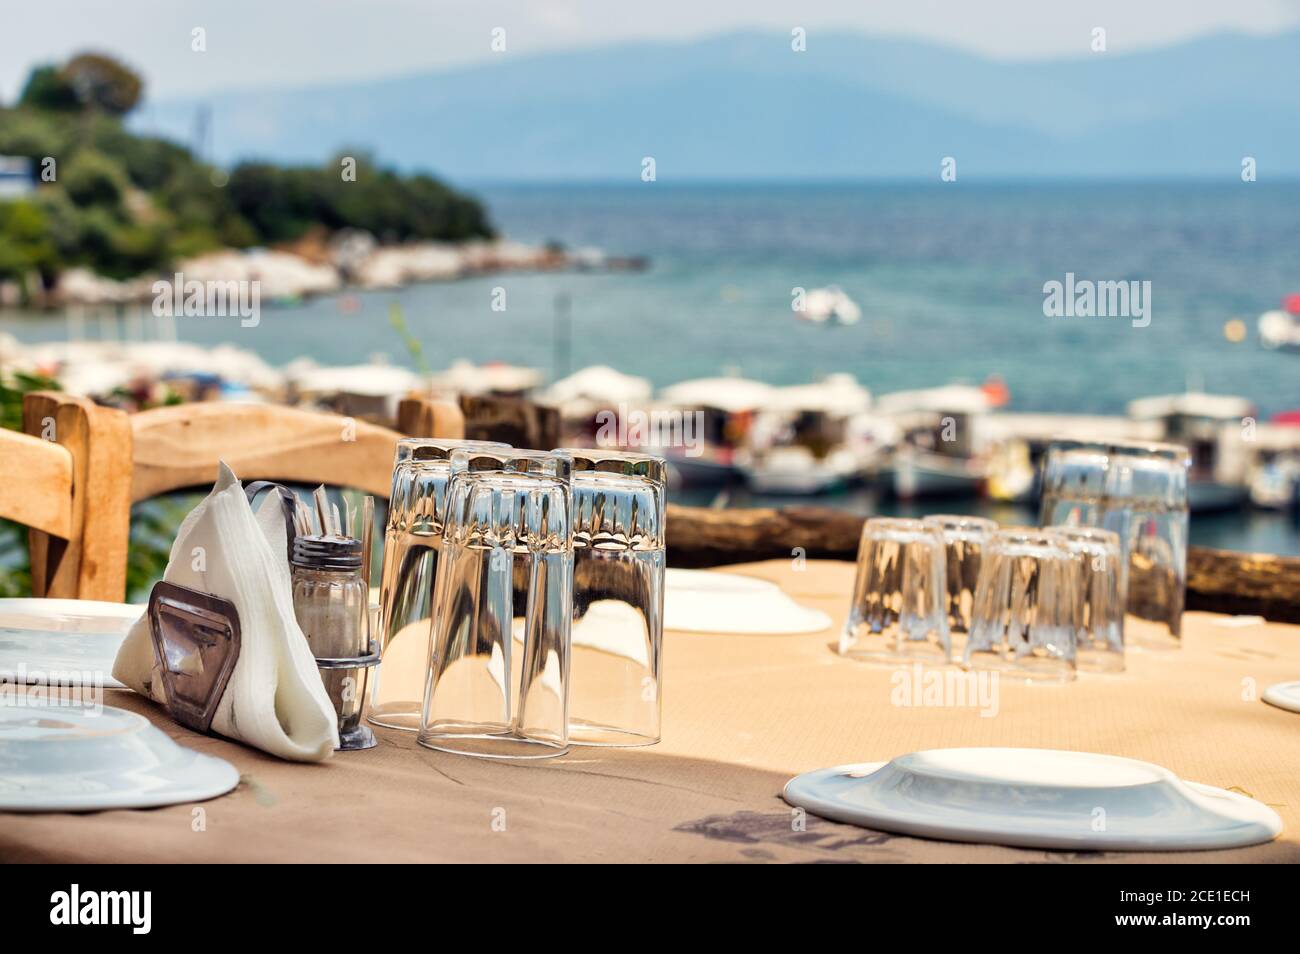 Glasses and plates on a wooden table of a greek tavern over the view of the port of Amaliapoli, Greece Stock Photo